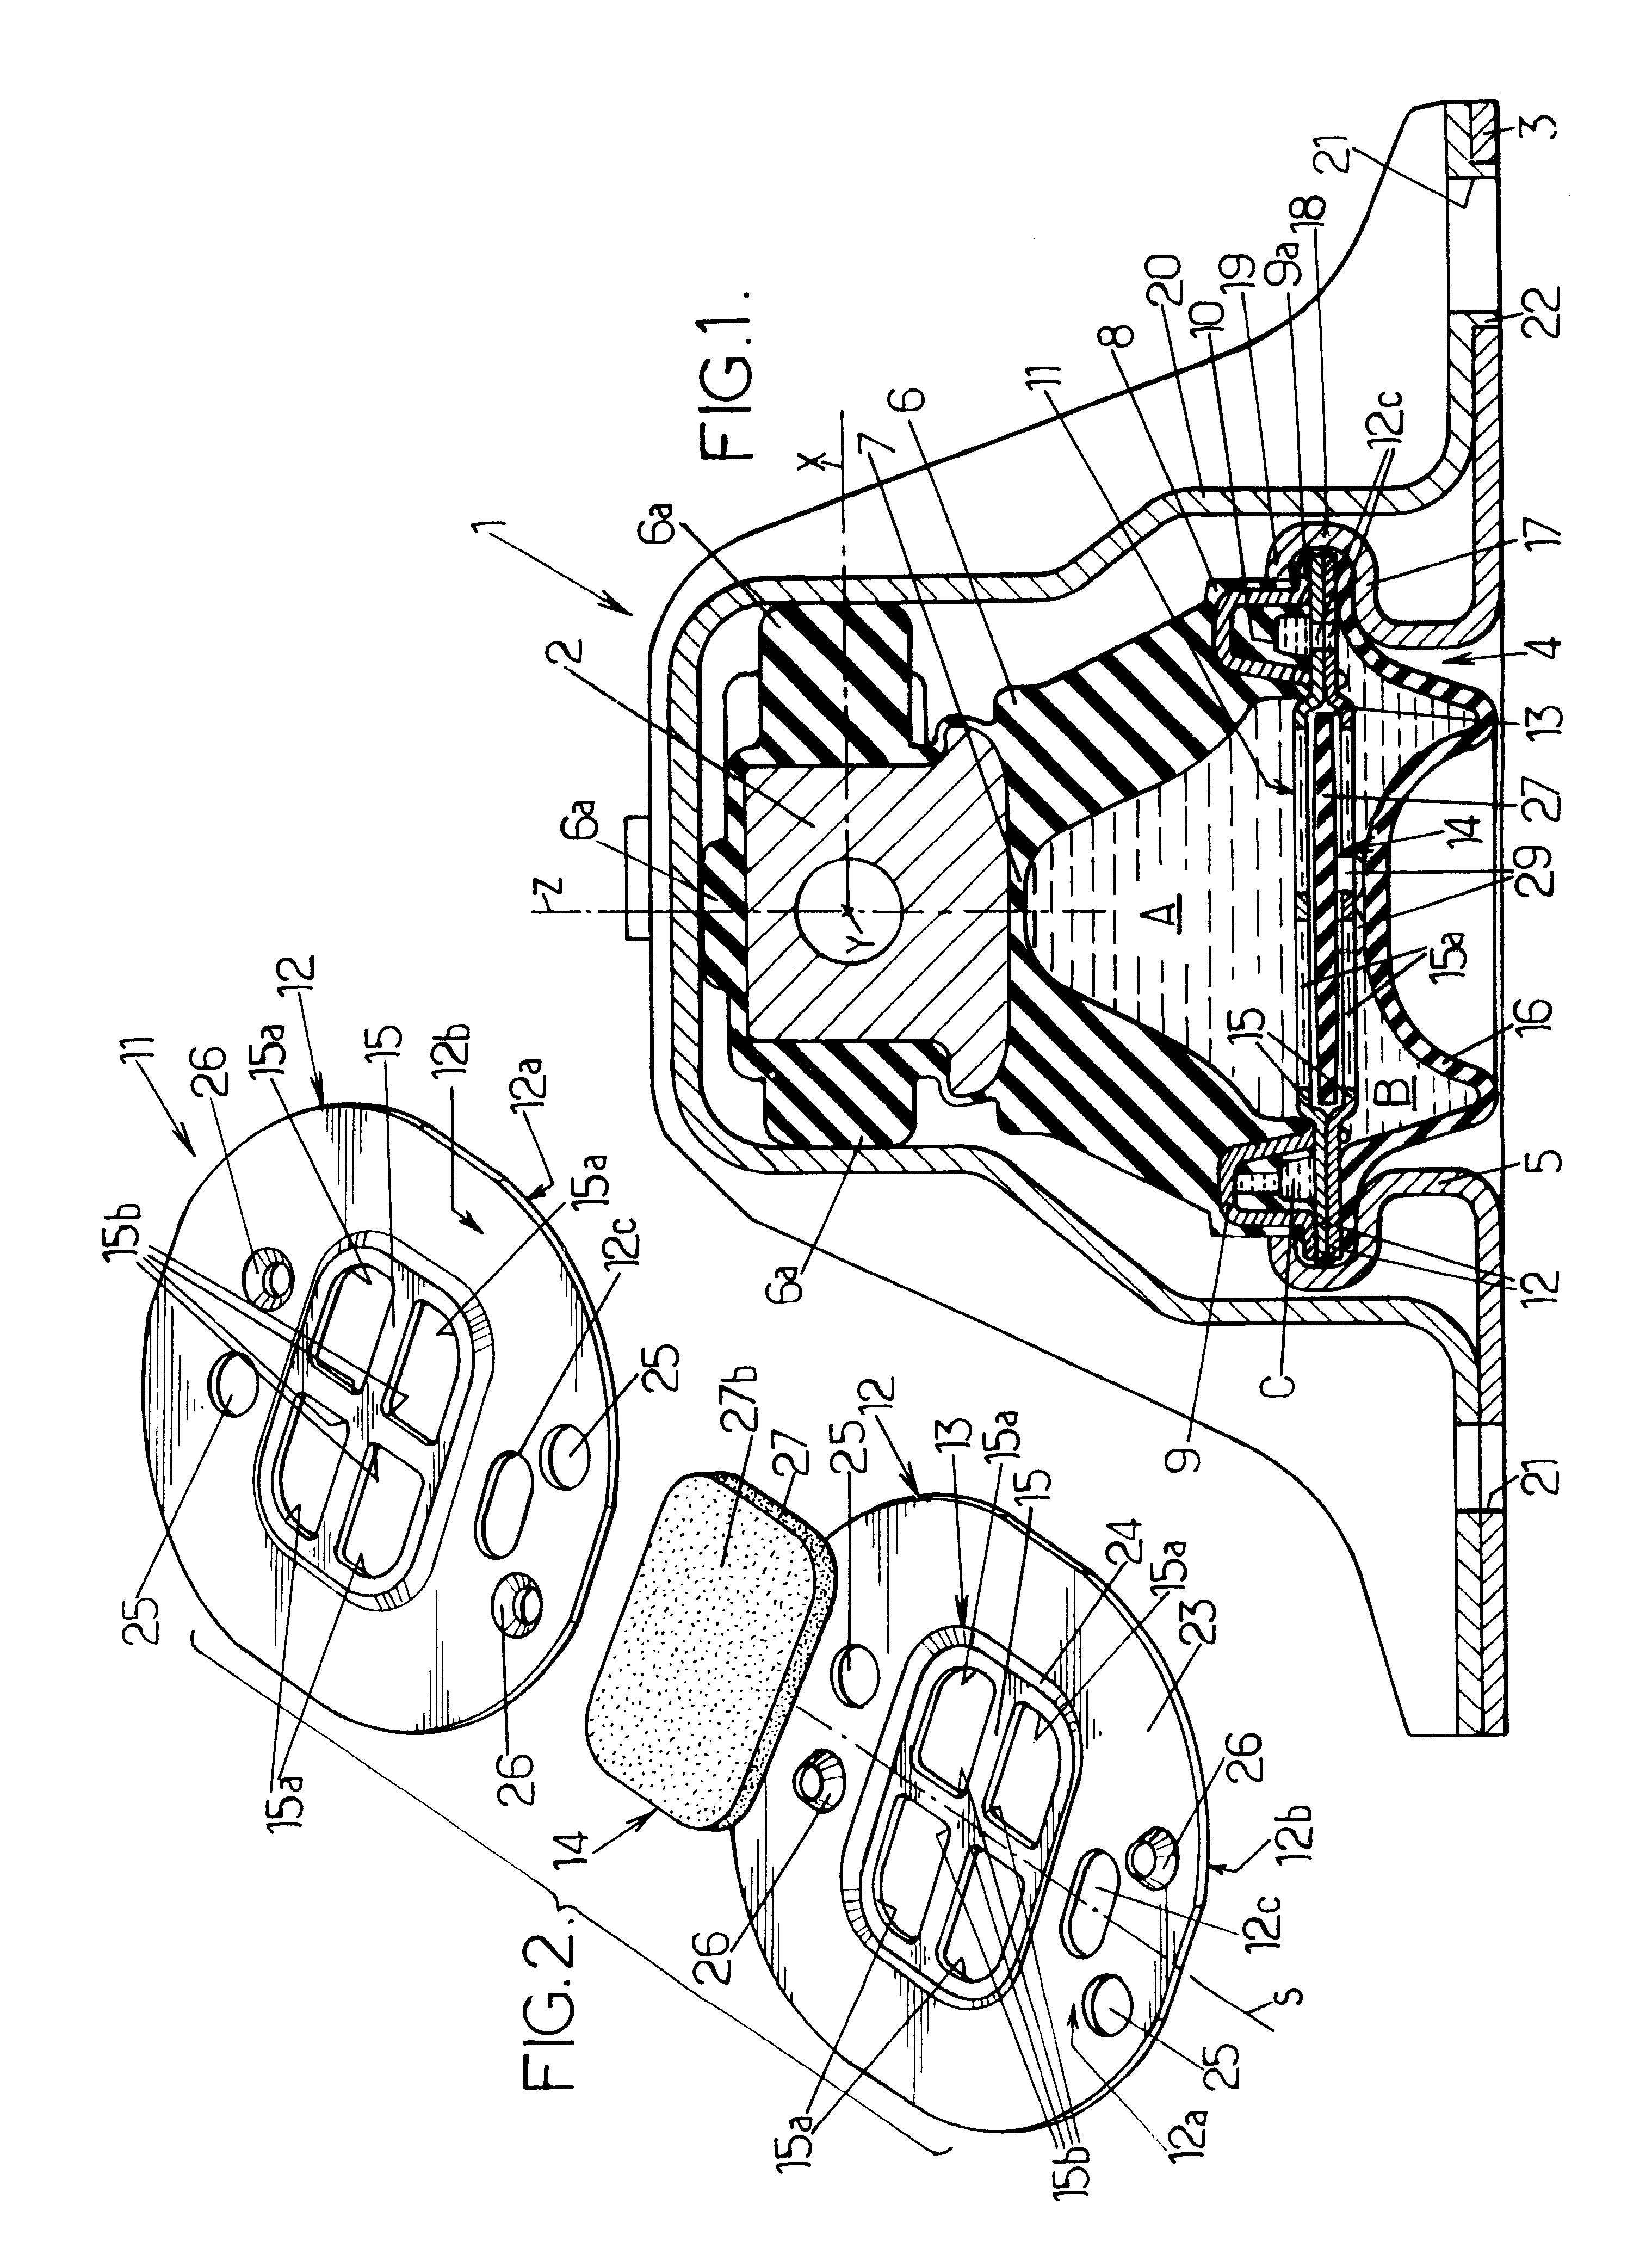 Hydraulic vibration-damping support including a clip-on decoupling flap